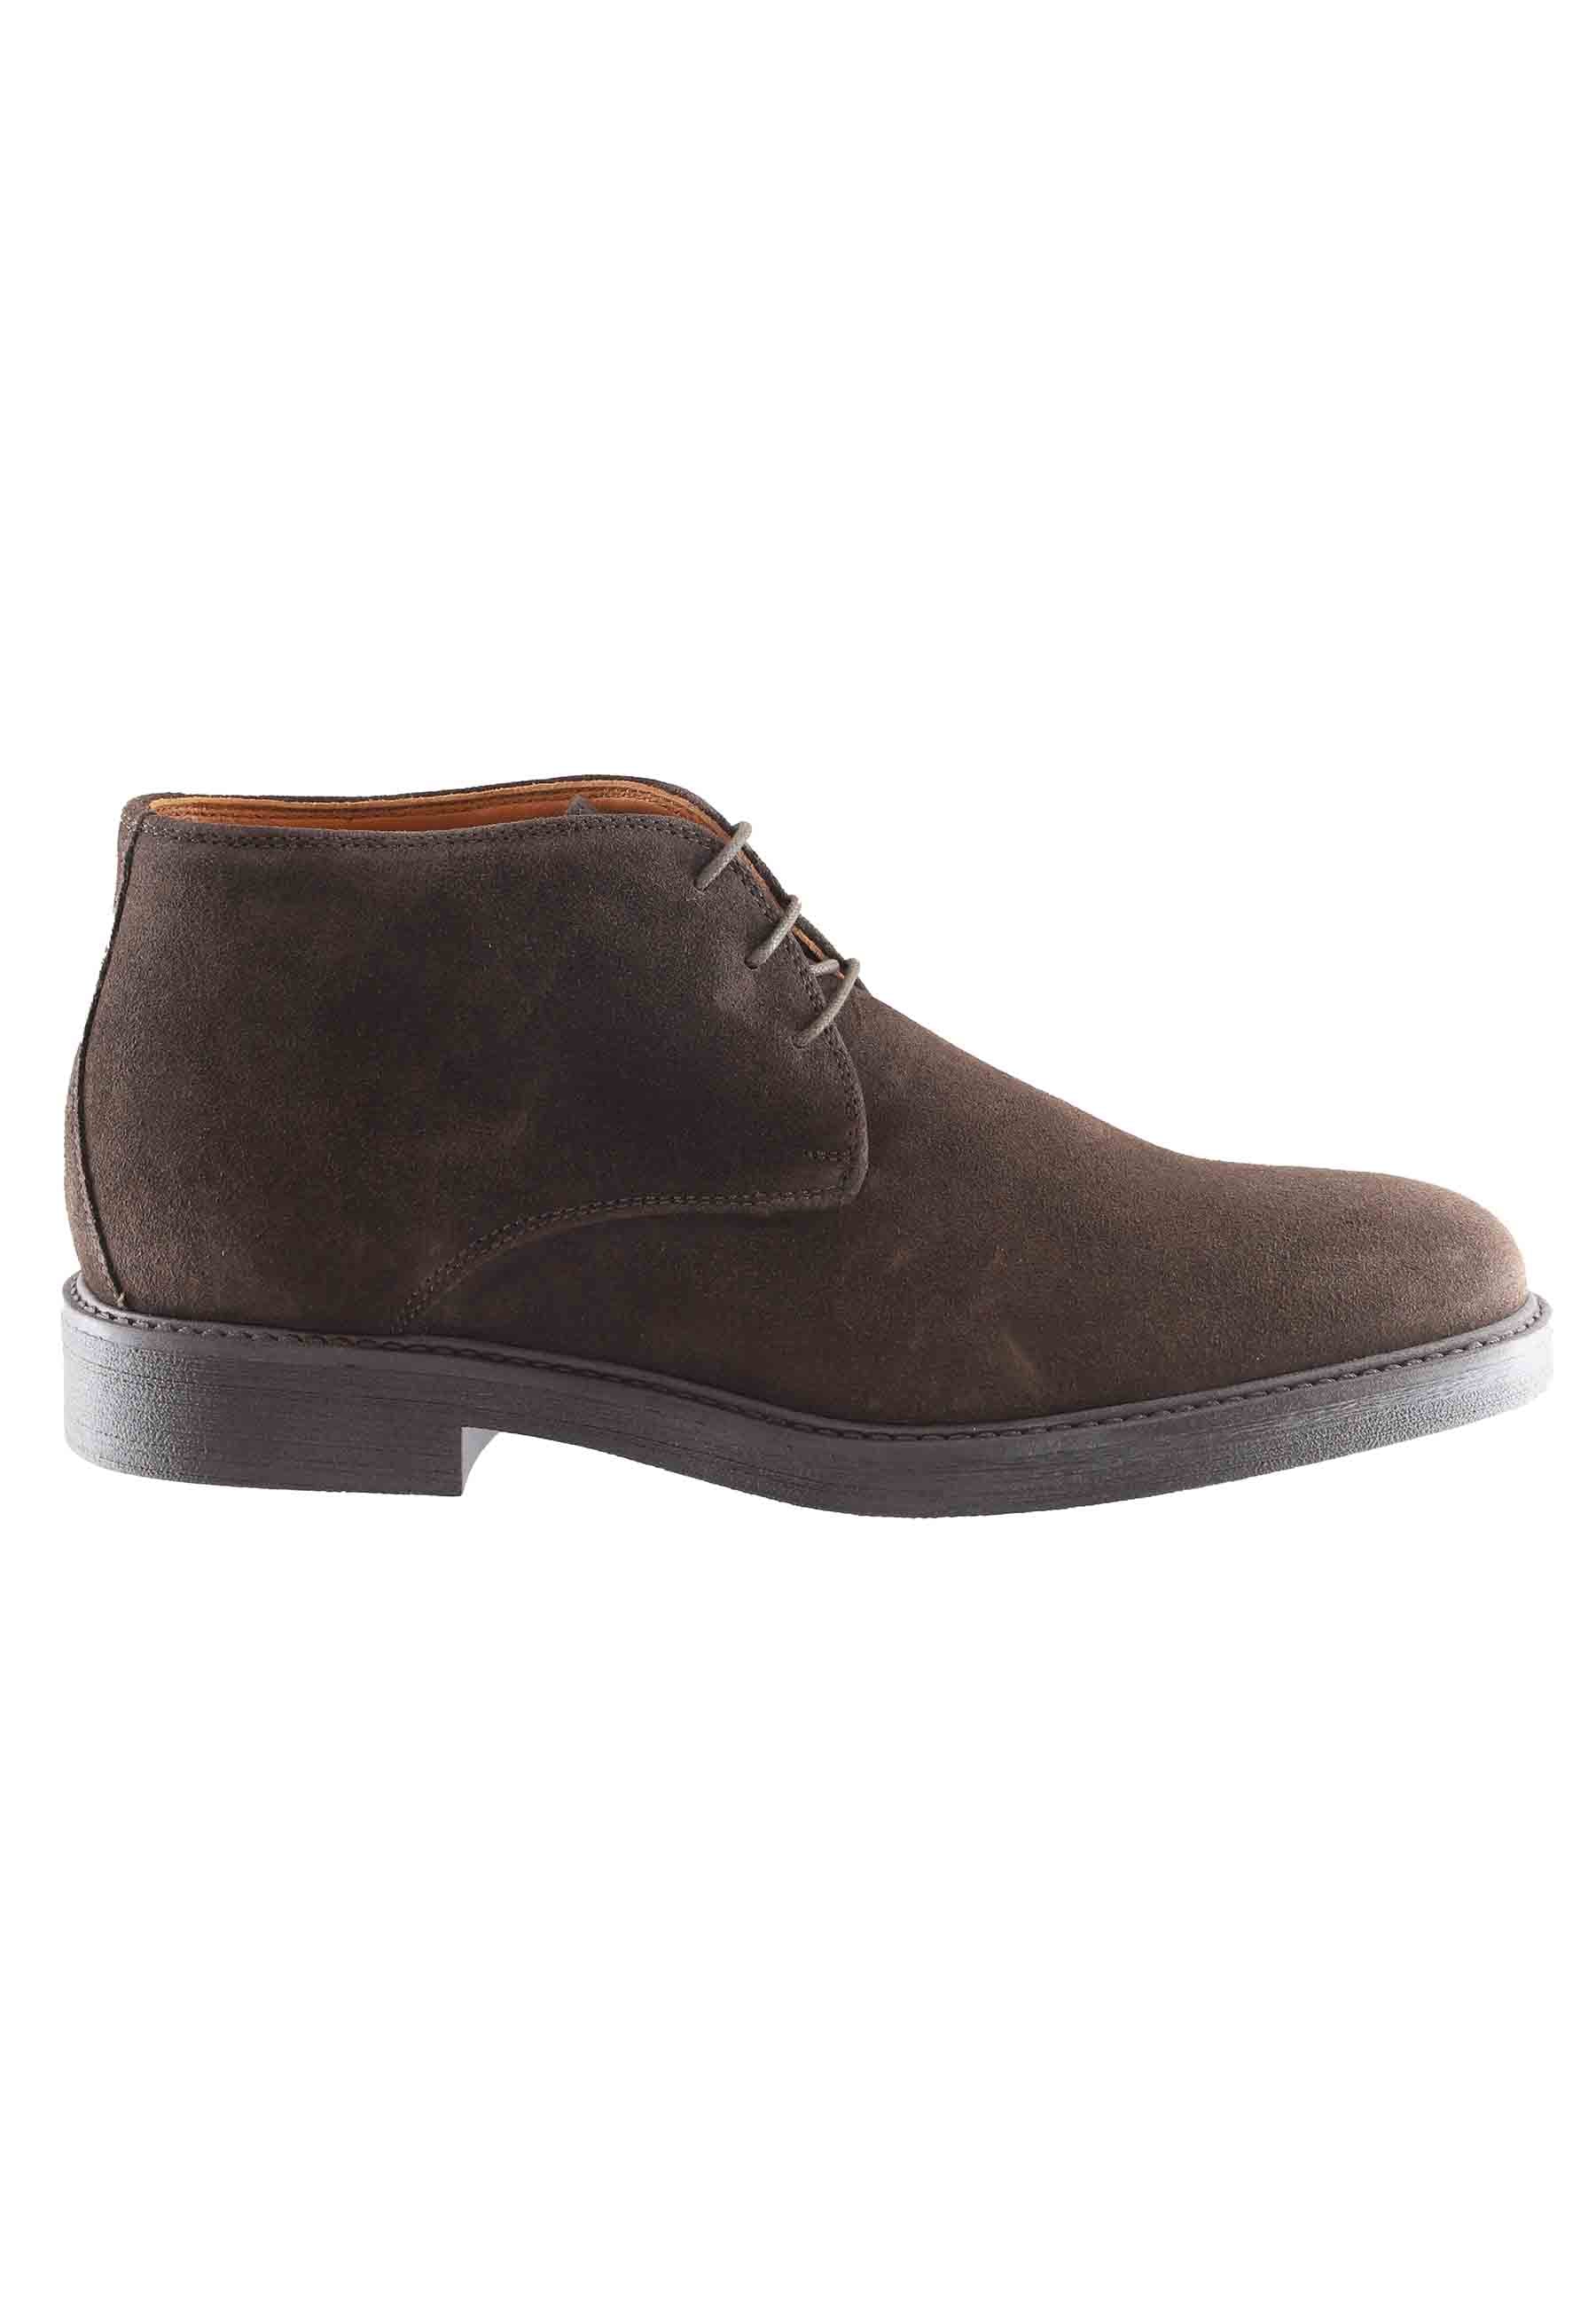 Men's ankle boots in dark brown suede with rubber sole